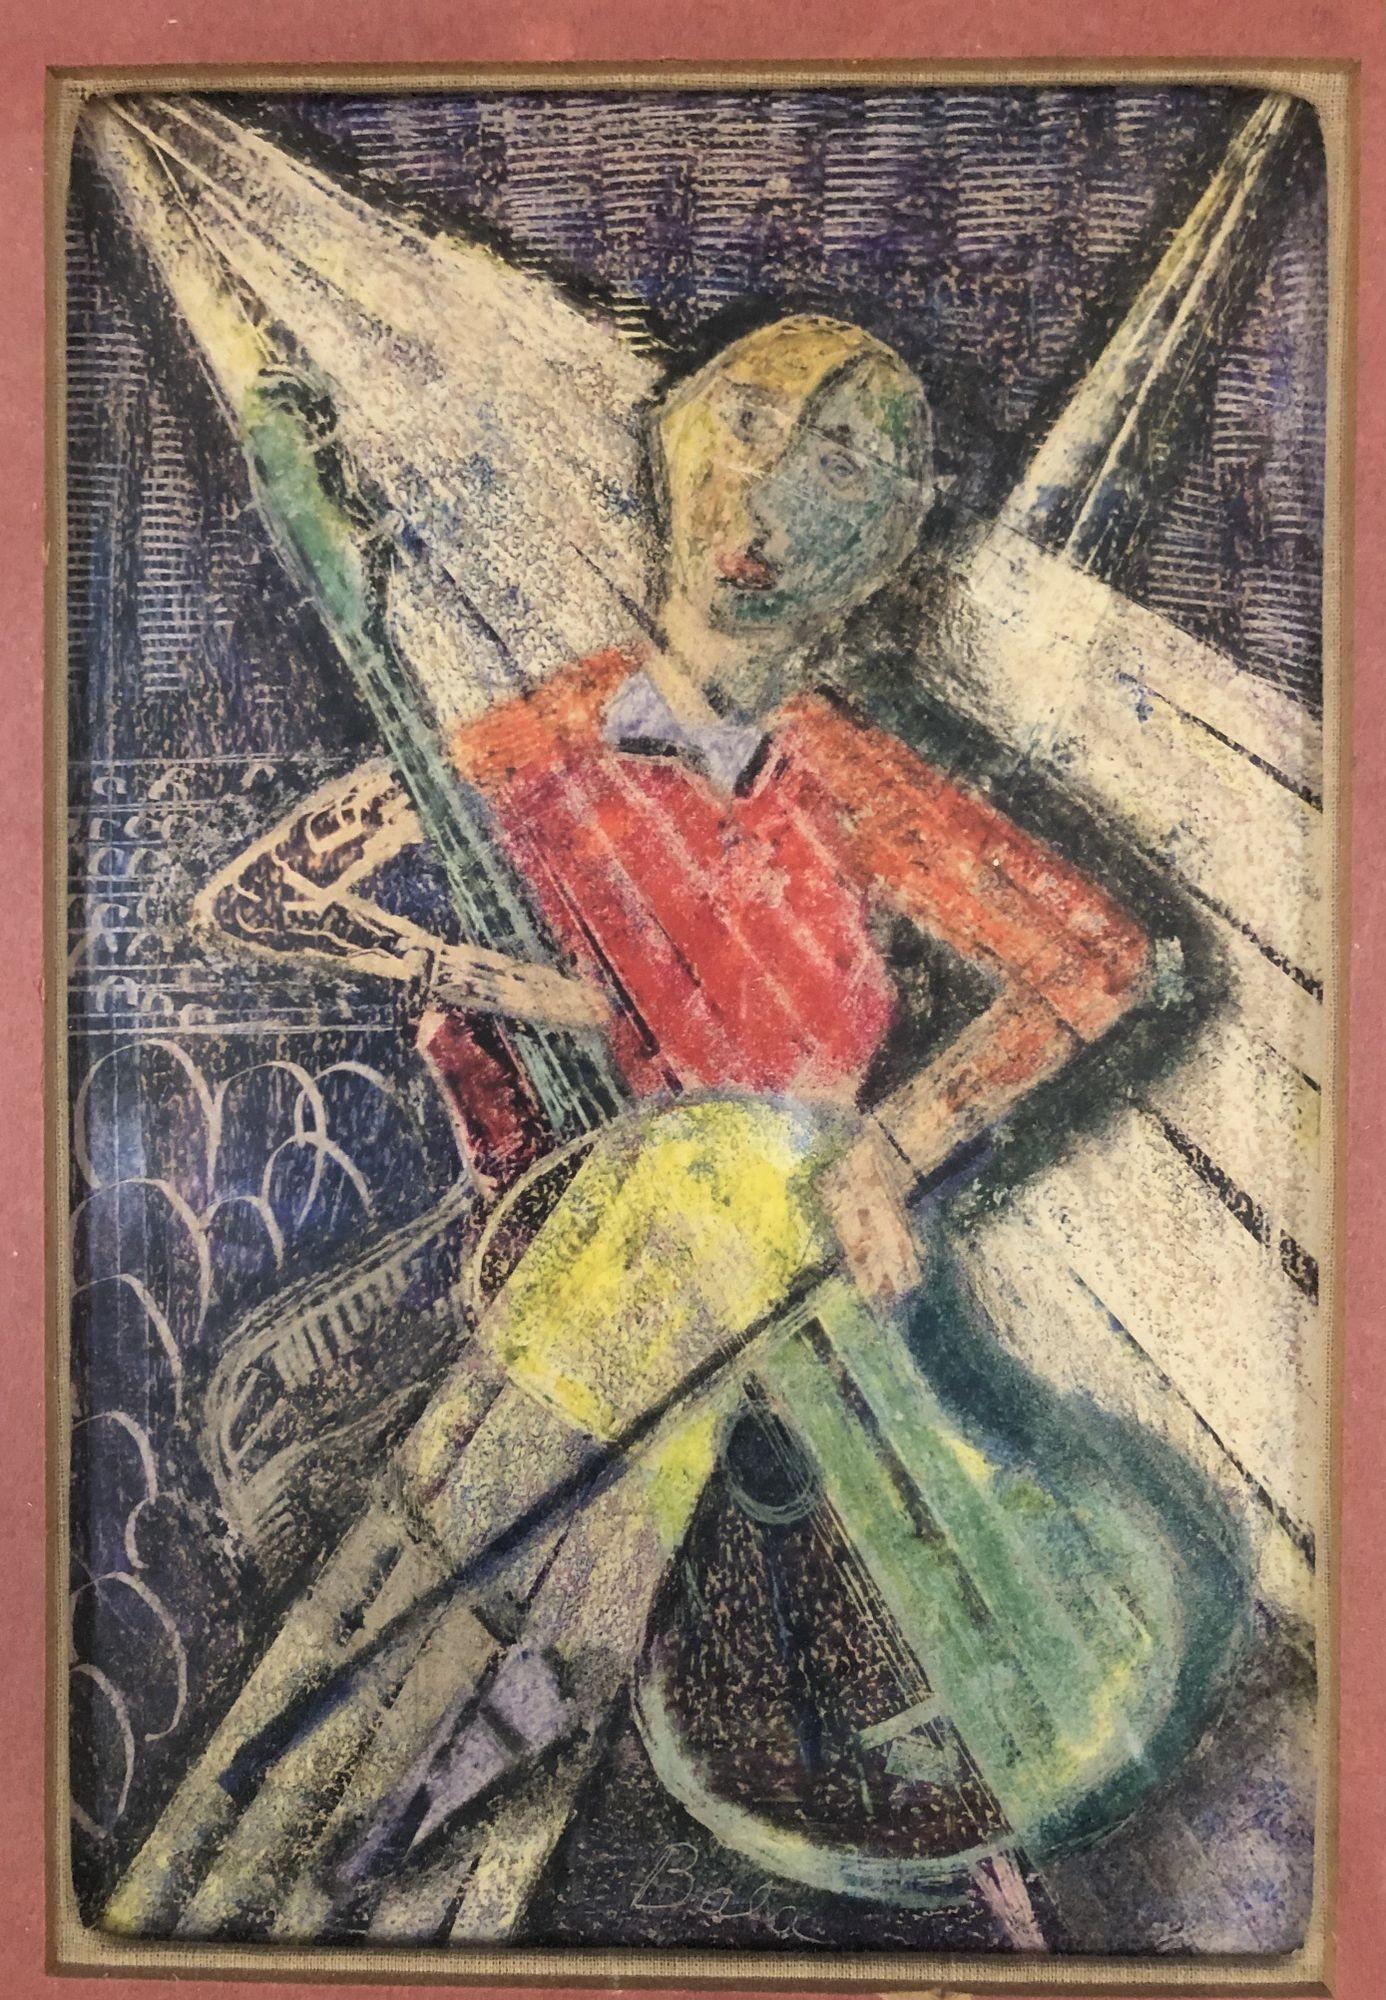 Vintage Wood Framed pastel print by artist Bala.

This painting with reminiscencies of a Picasso style signed by artist Bala depicts a man playing what it looks like a cello, against an abstract background. It has been mounted on cardboard and wood